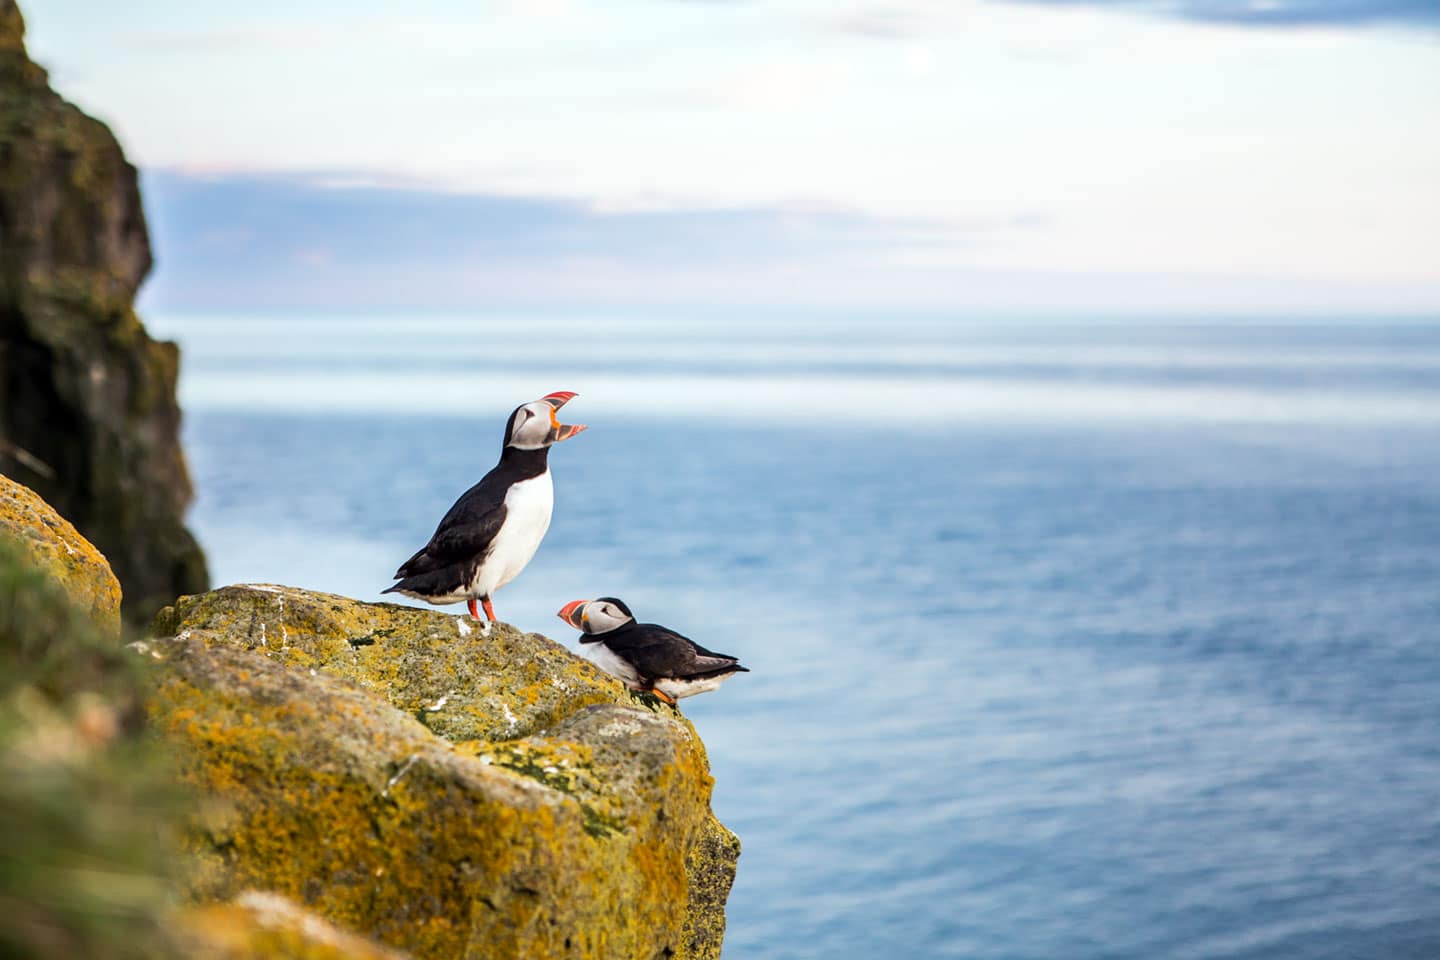 Puffins in Iceland on the edge of a cliff